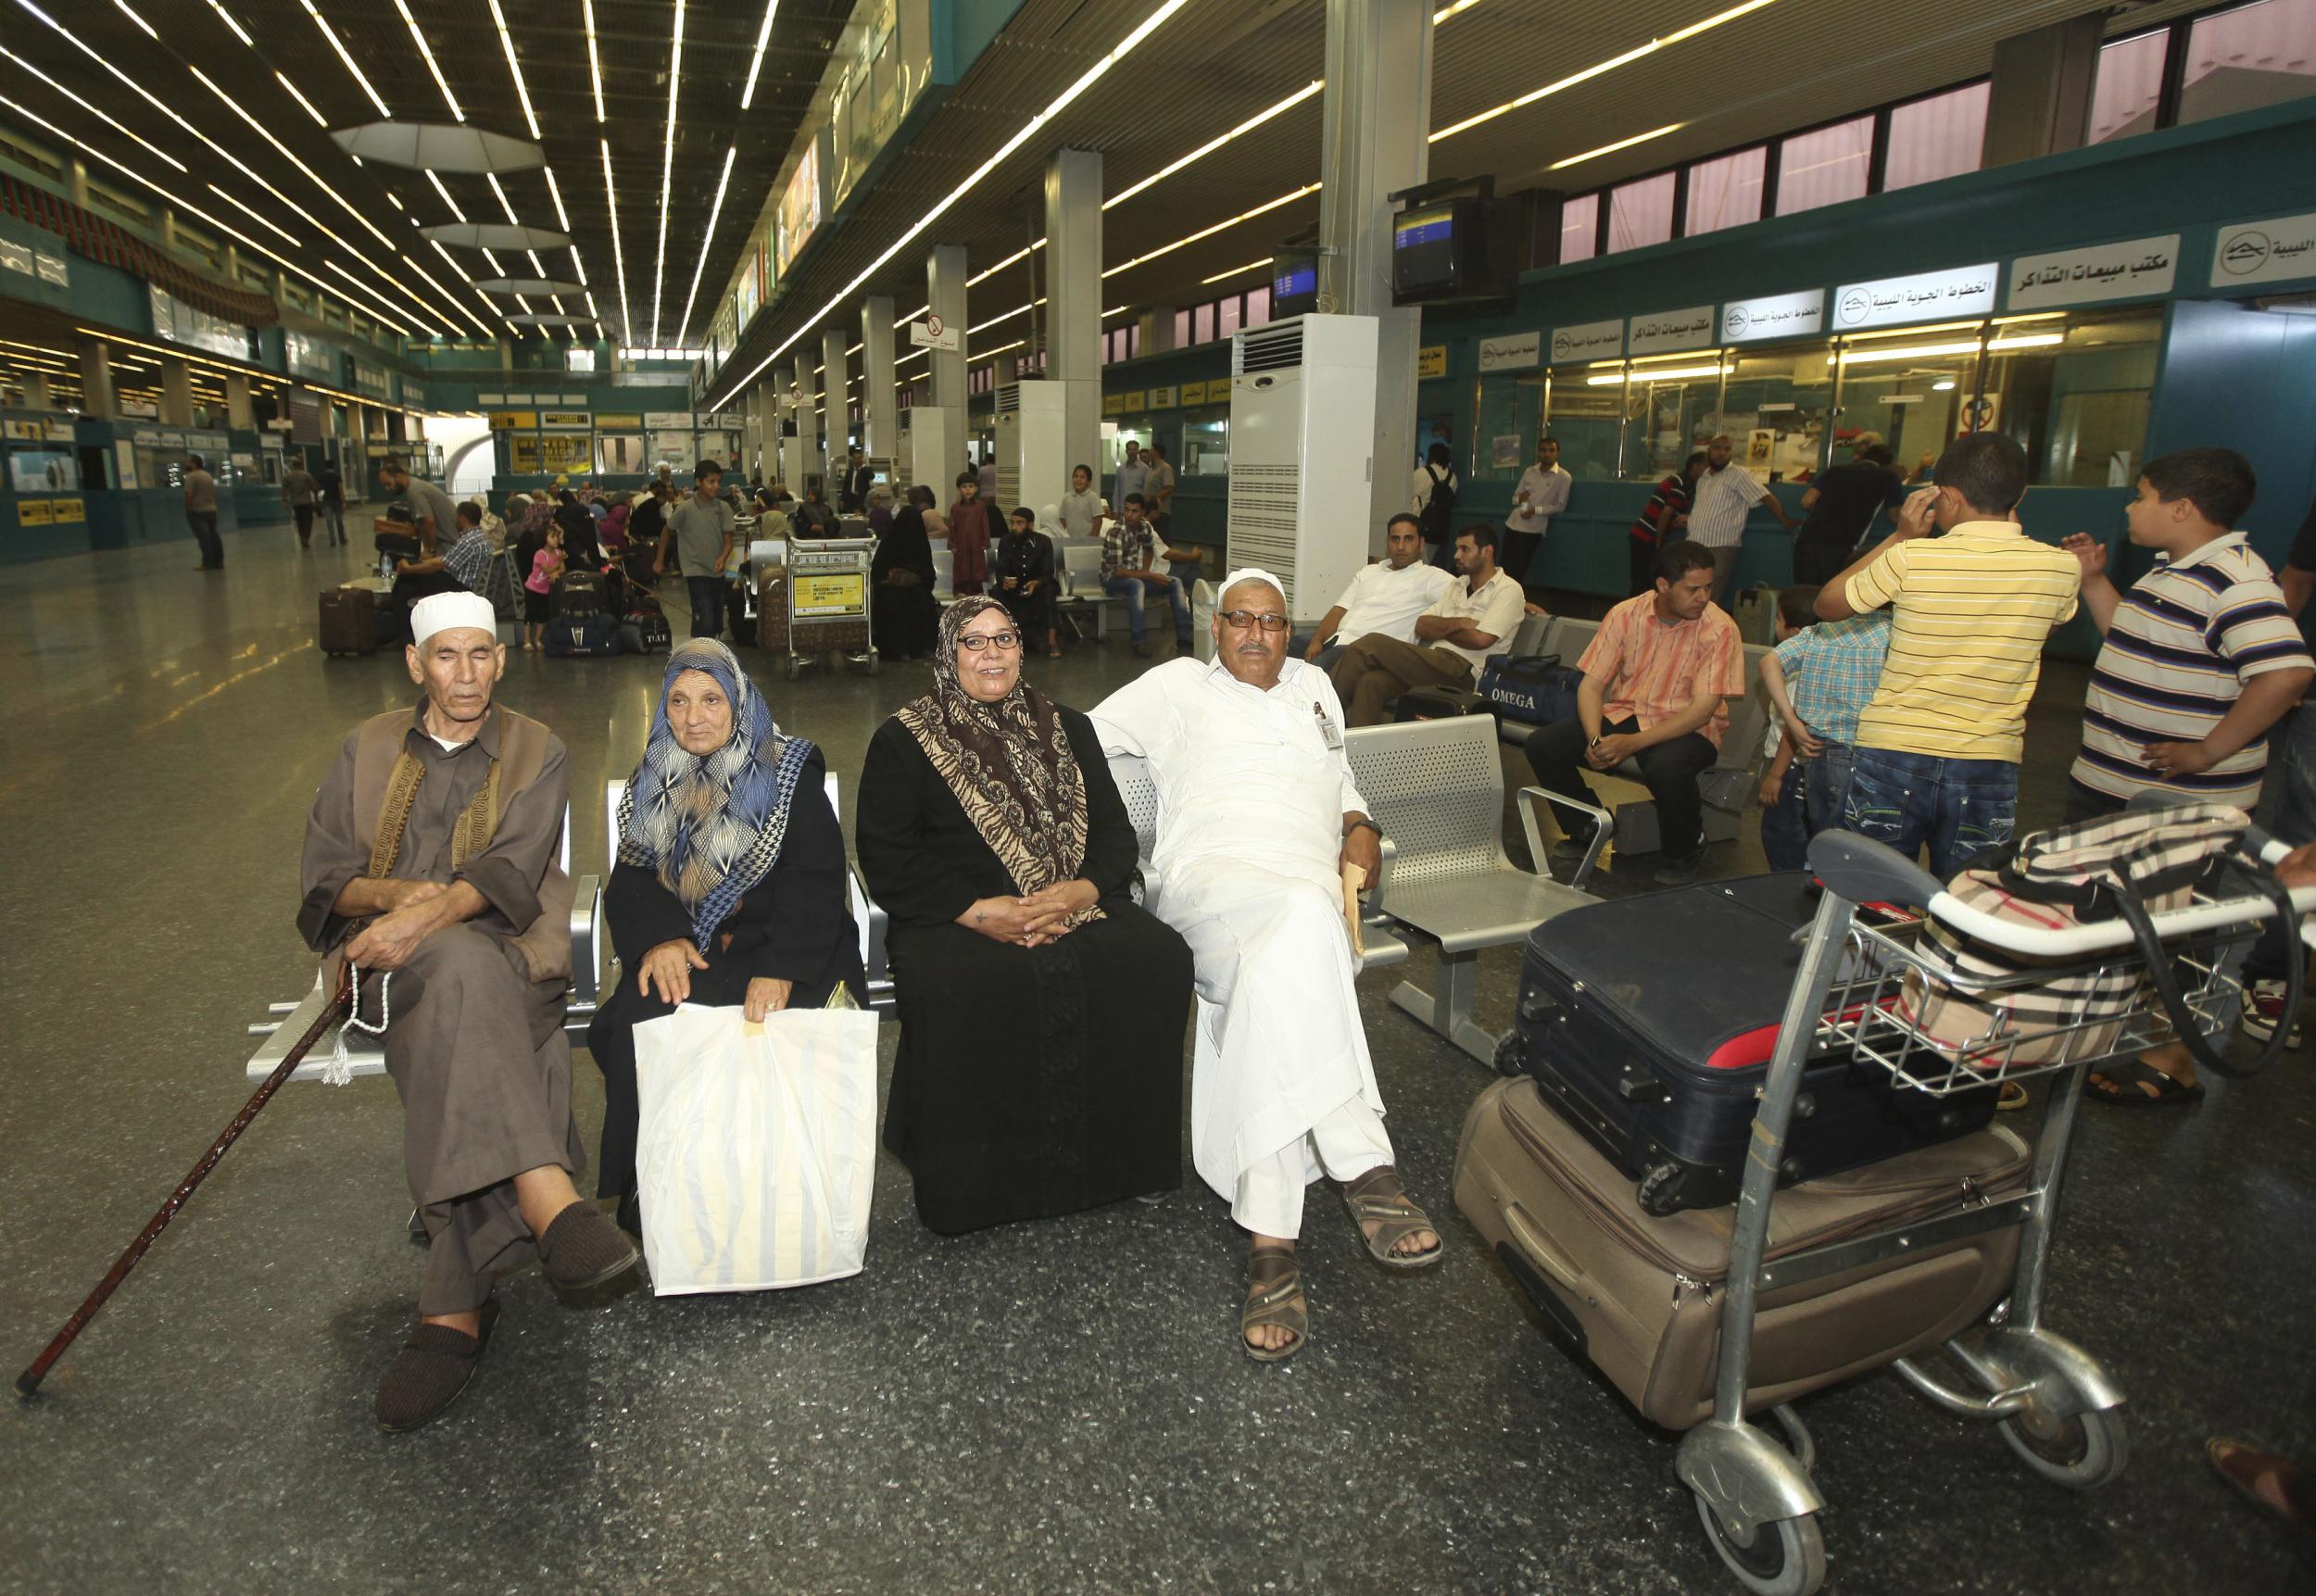 Women in eastern Libya were told they could not travel abroad unless accompanied by a man